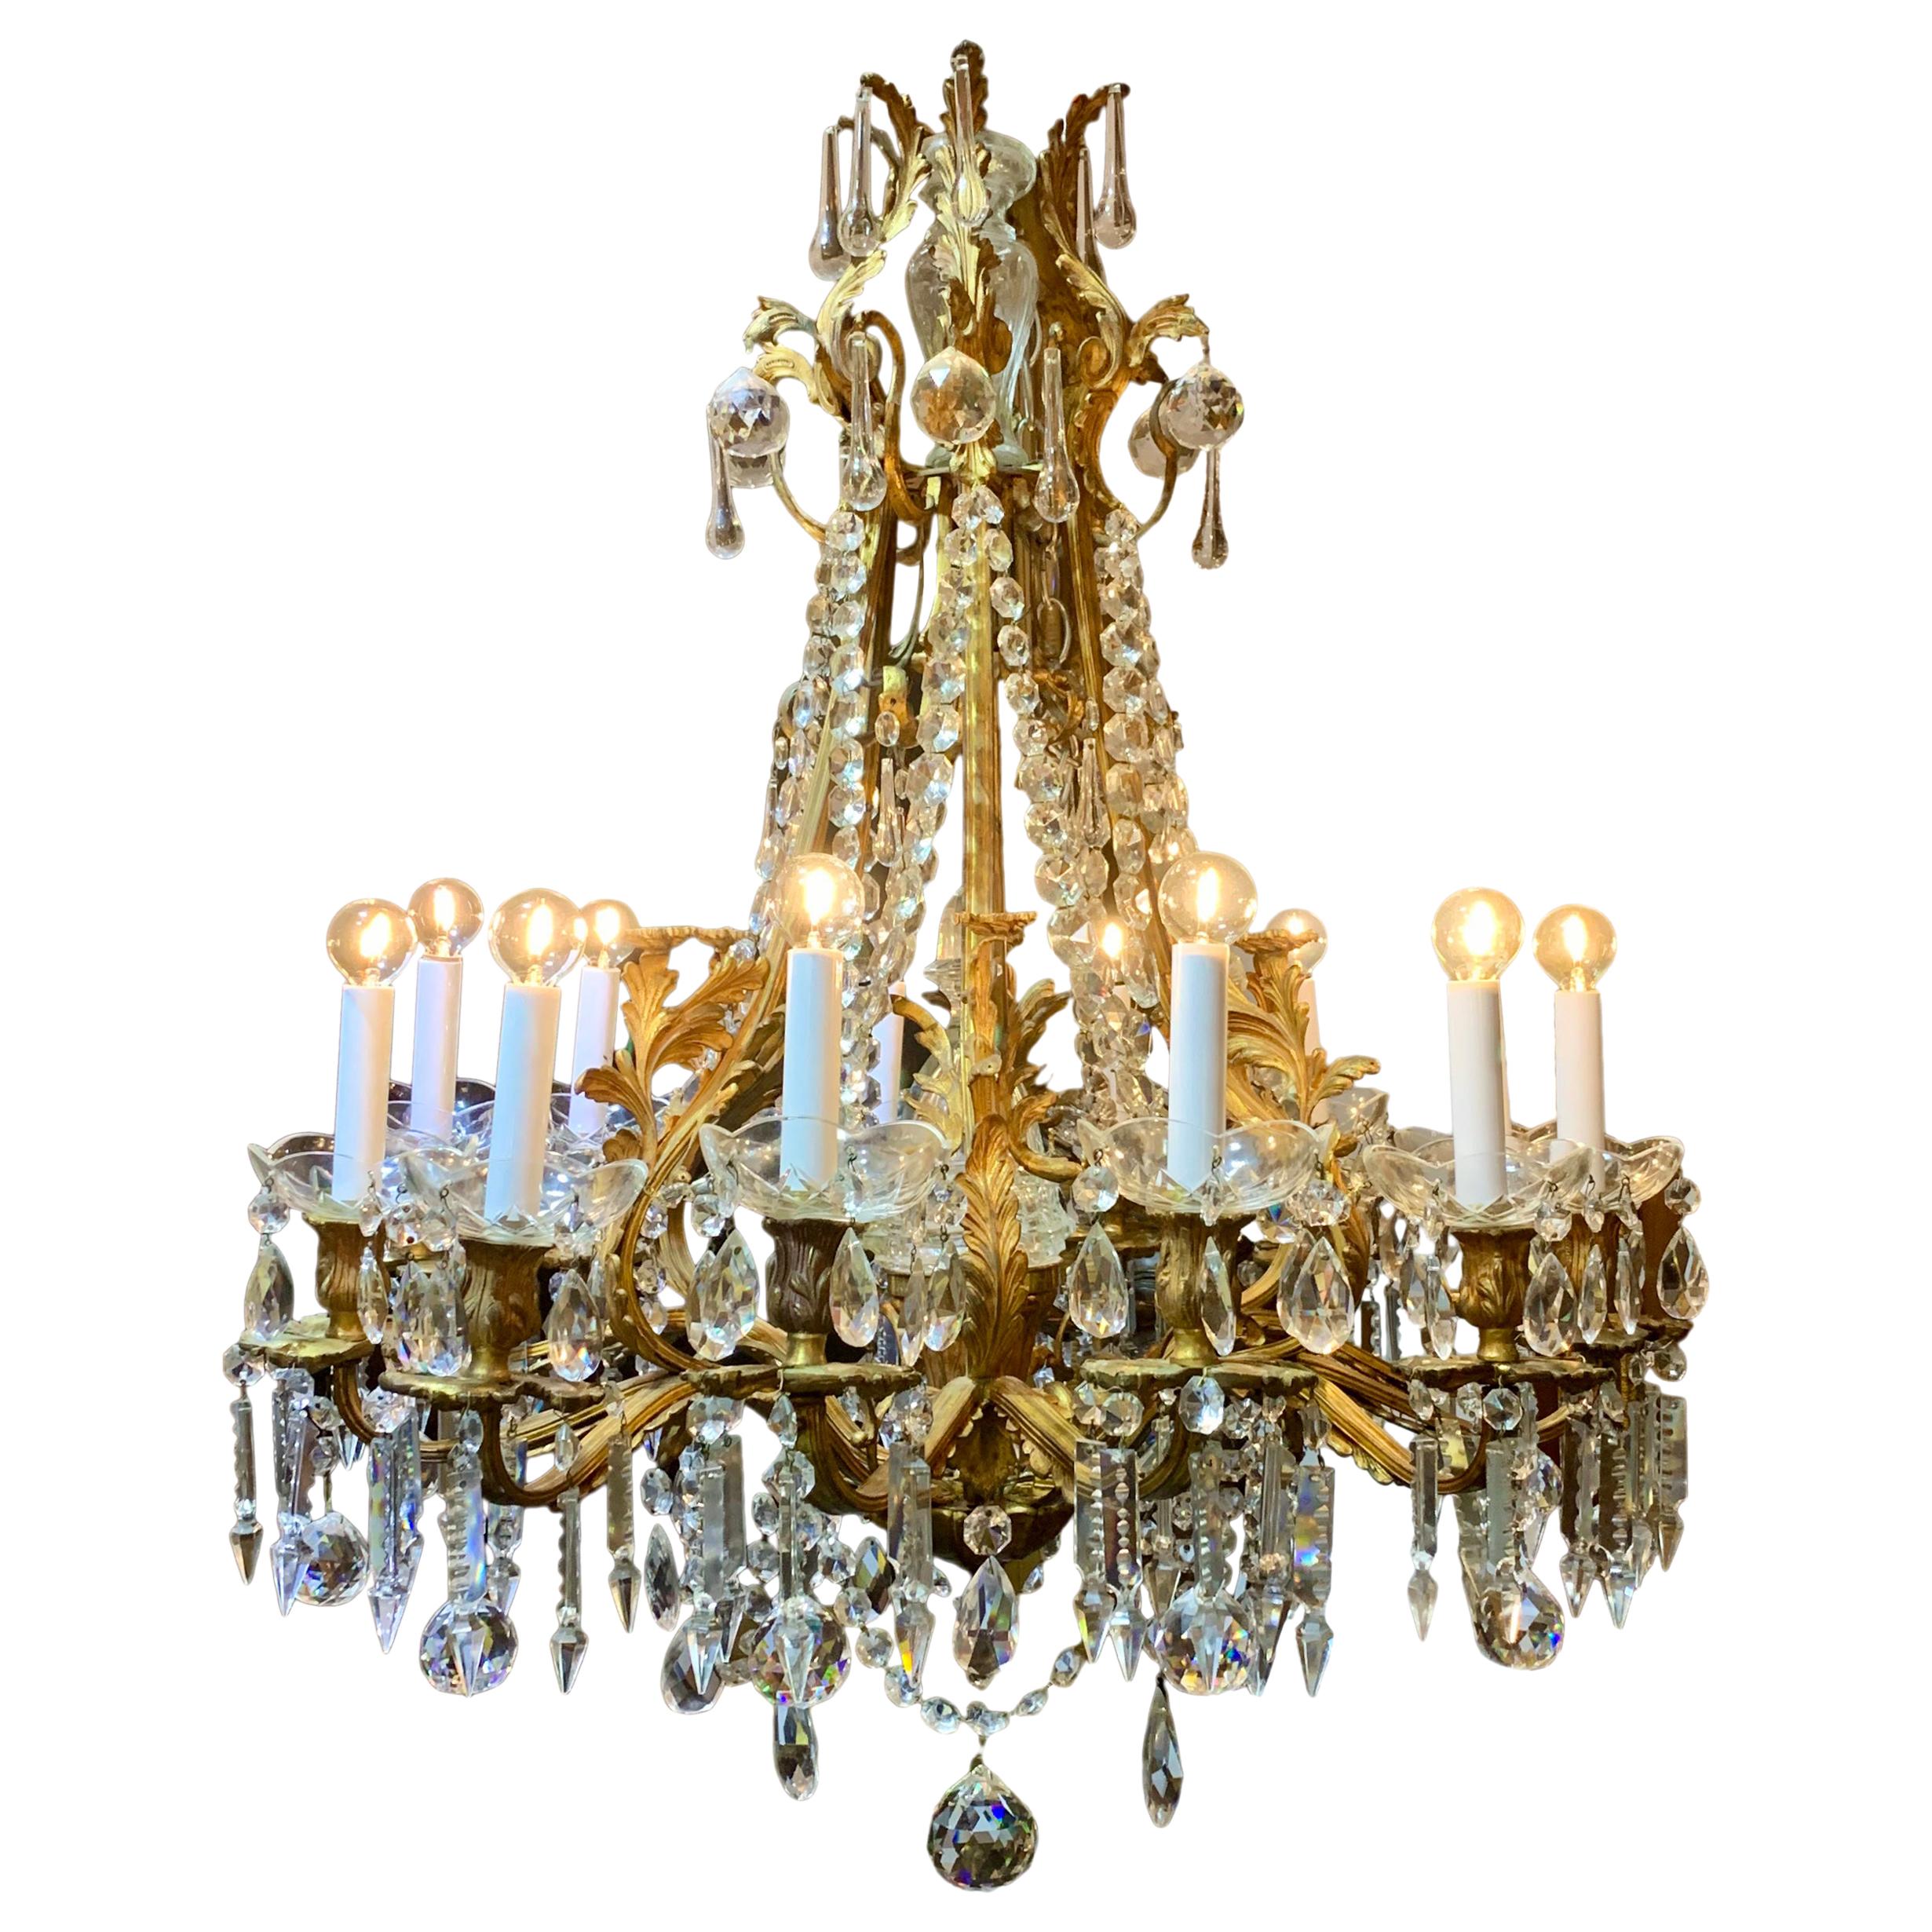 19th century French ormolu and crystal Marie Antoinette chandelier For Sale